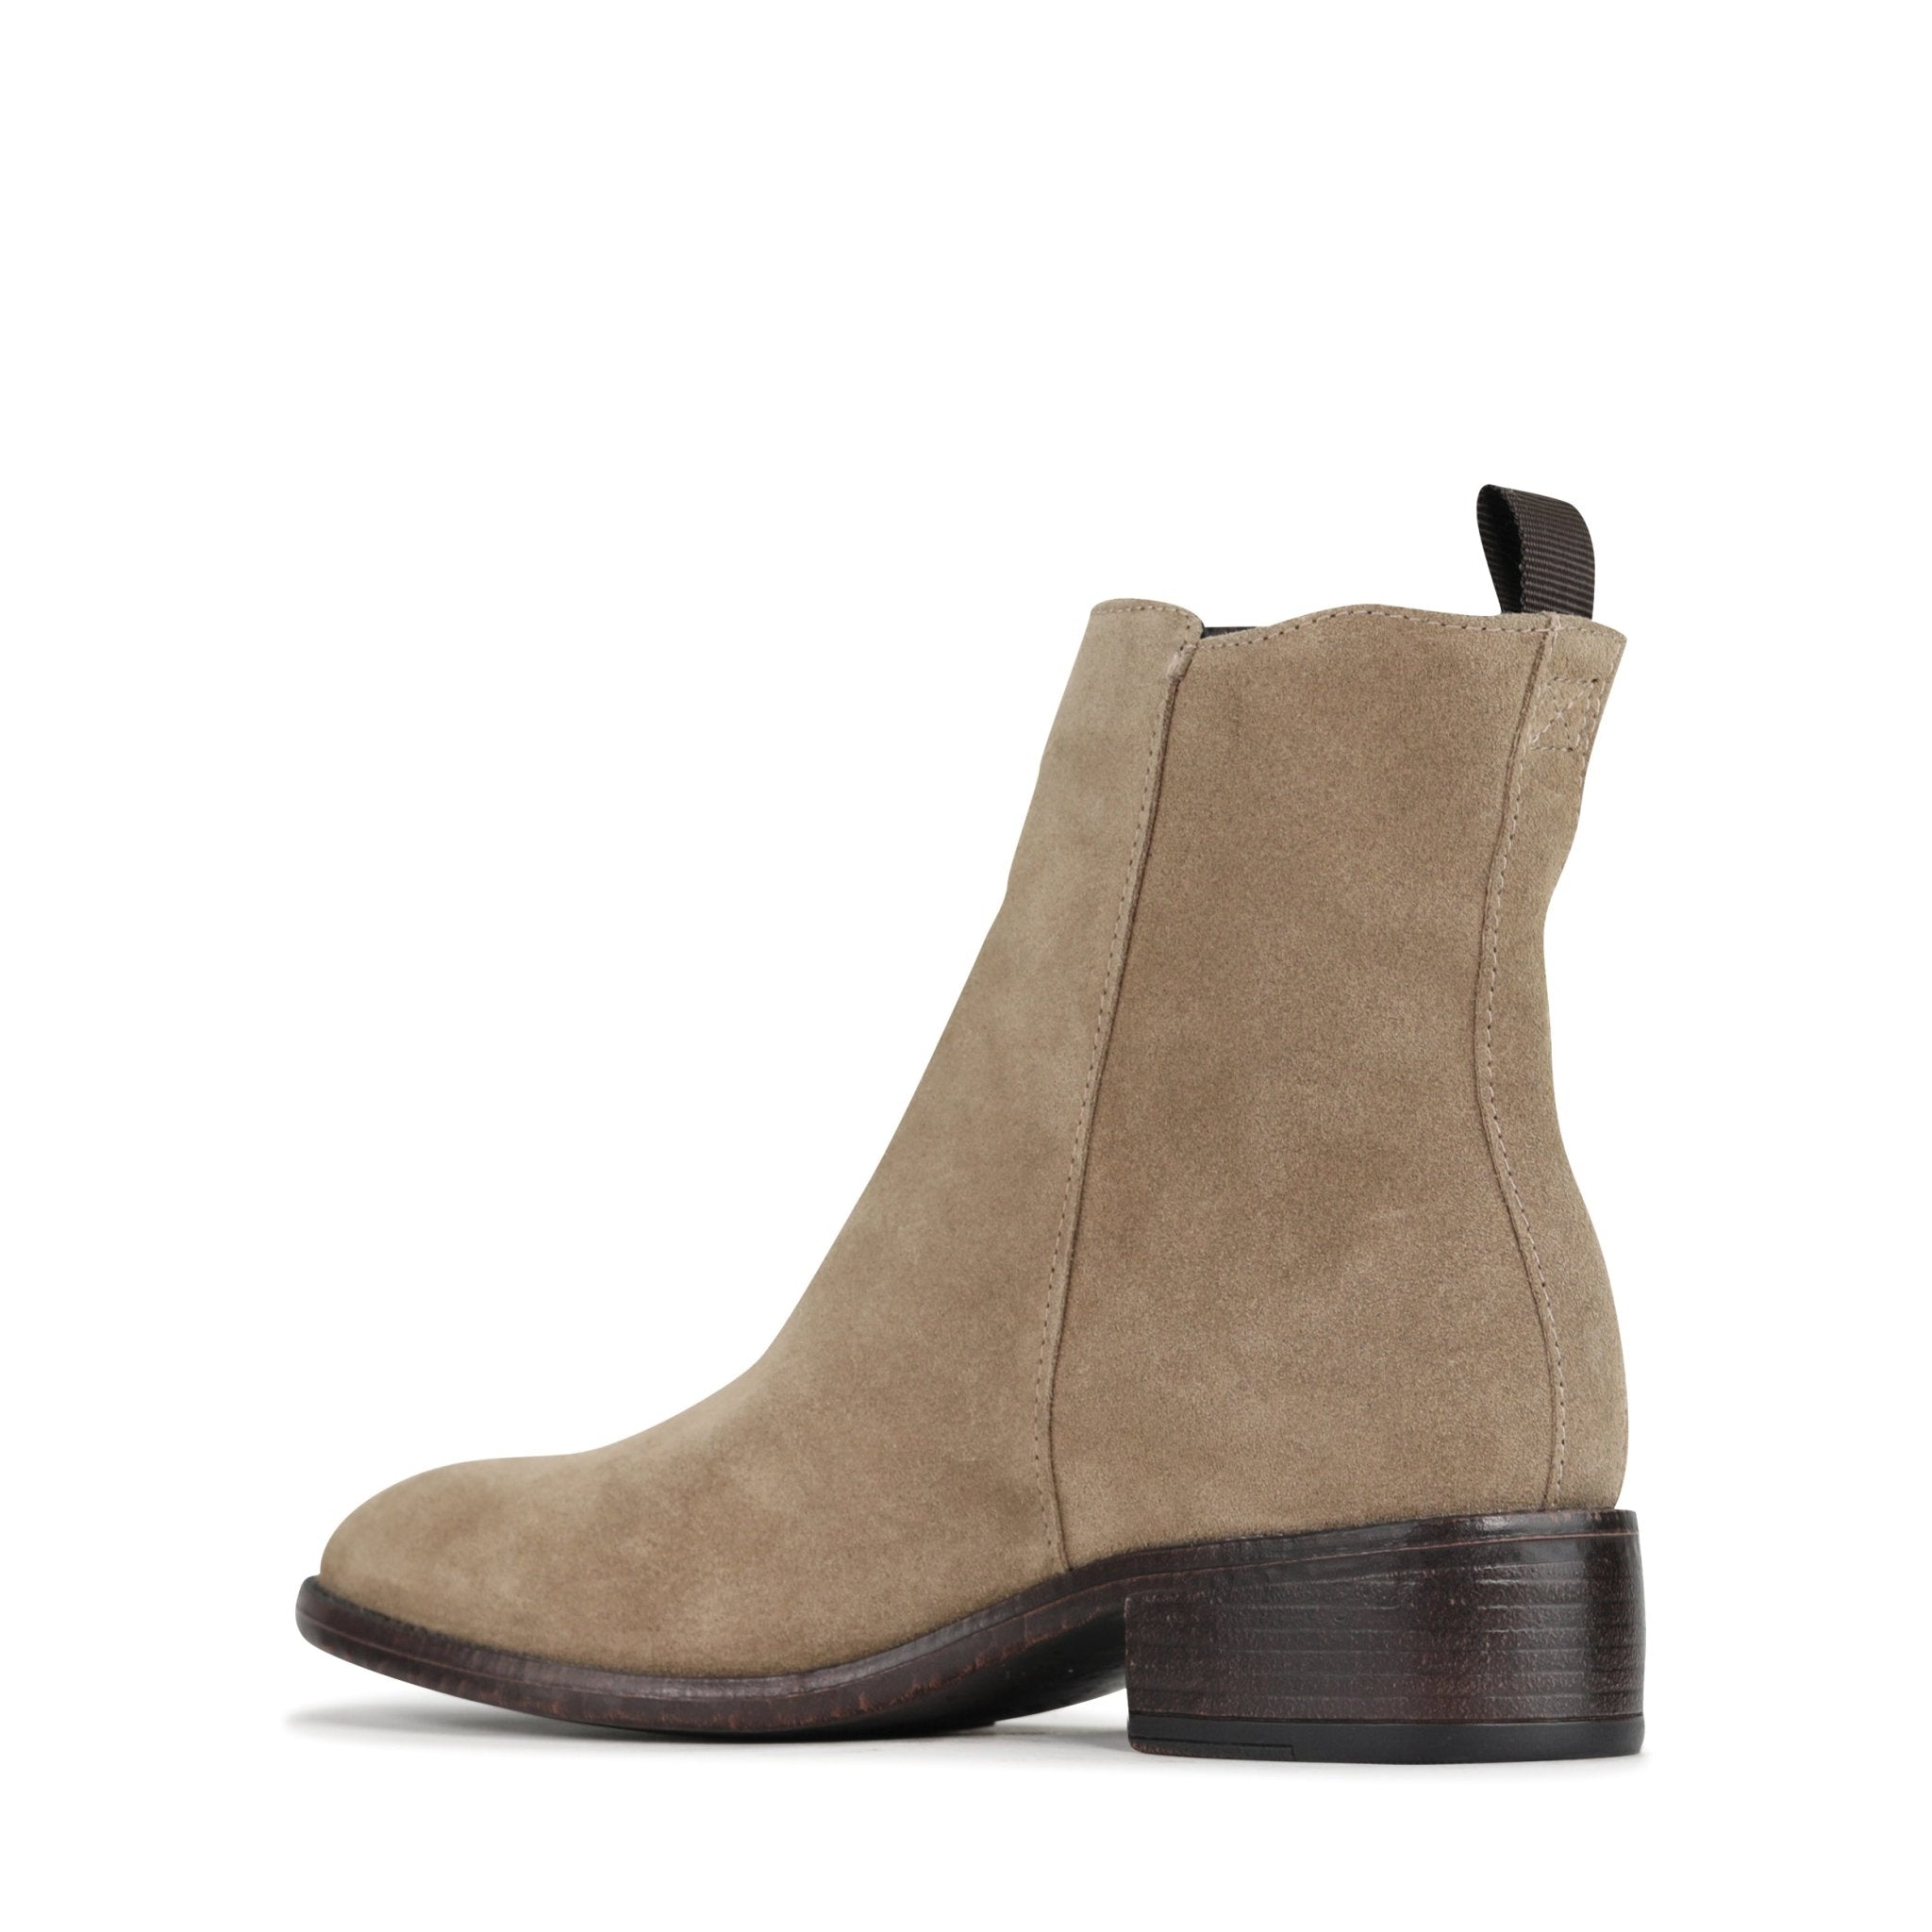 CELI - EOS Footwear - Ankle Boots #color_Taupe